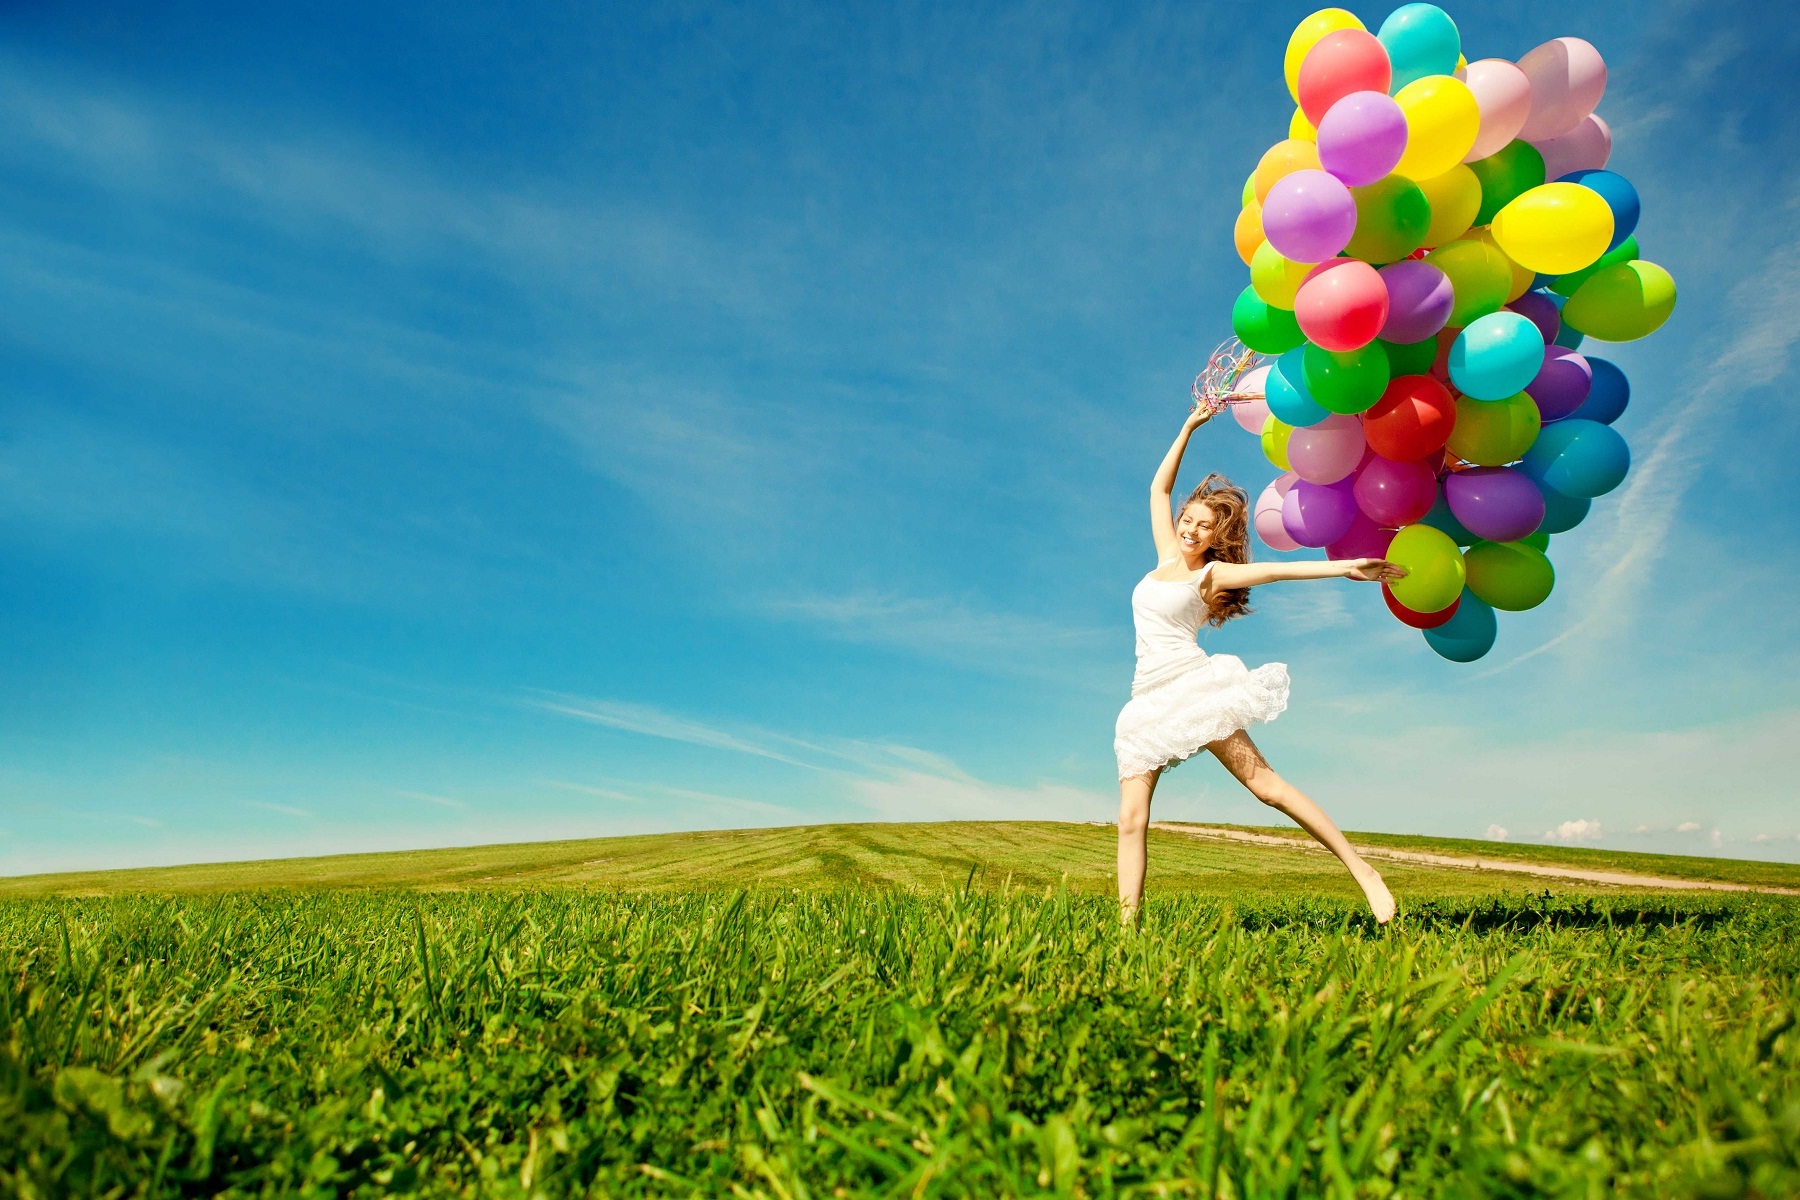 happy mood wallpapers hd,people in nature,sky,balloon,grassland,grass